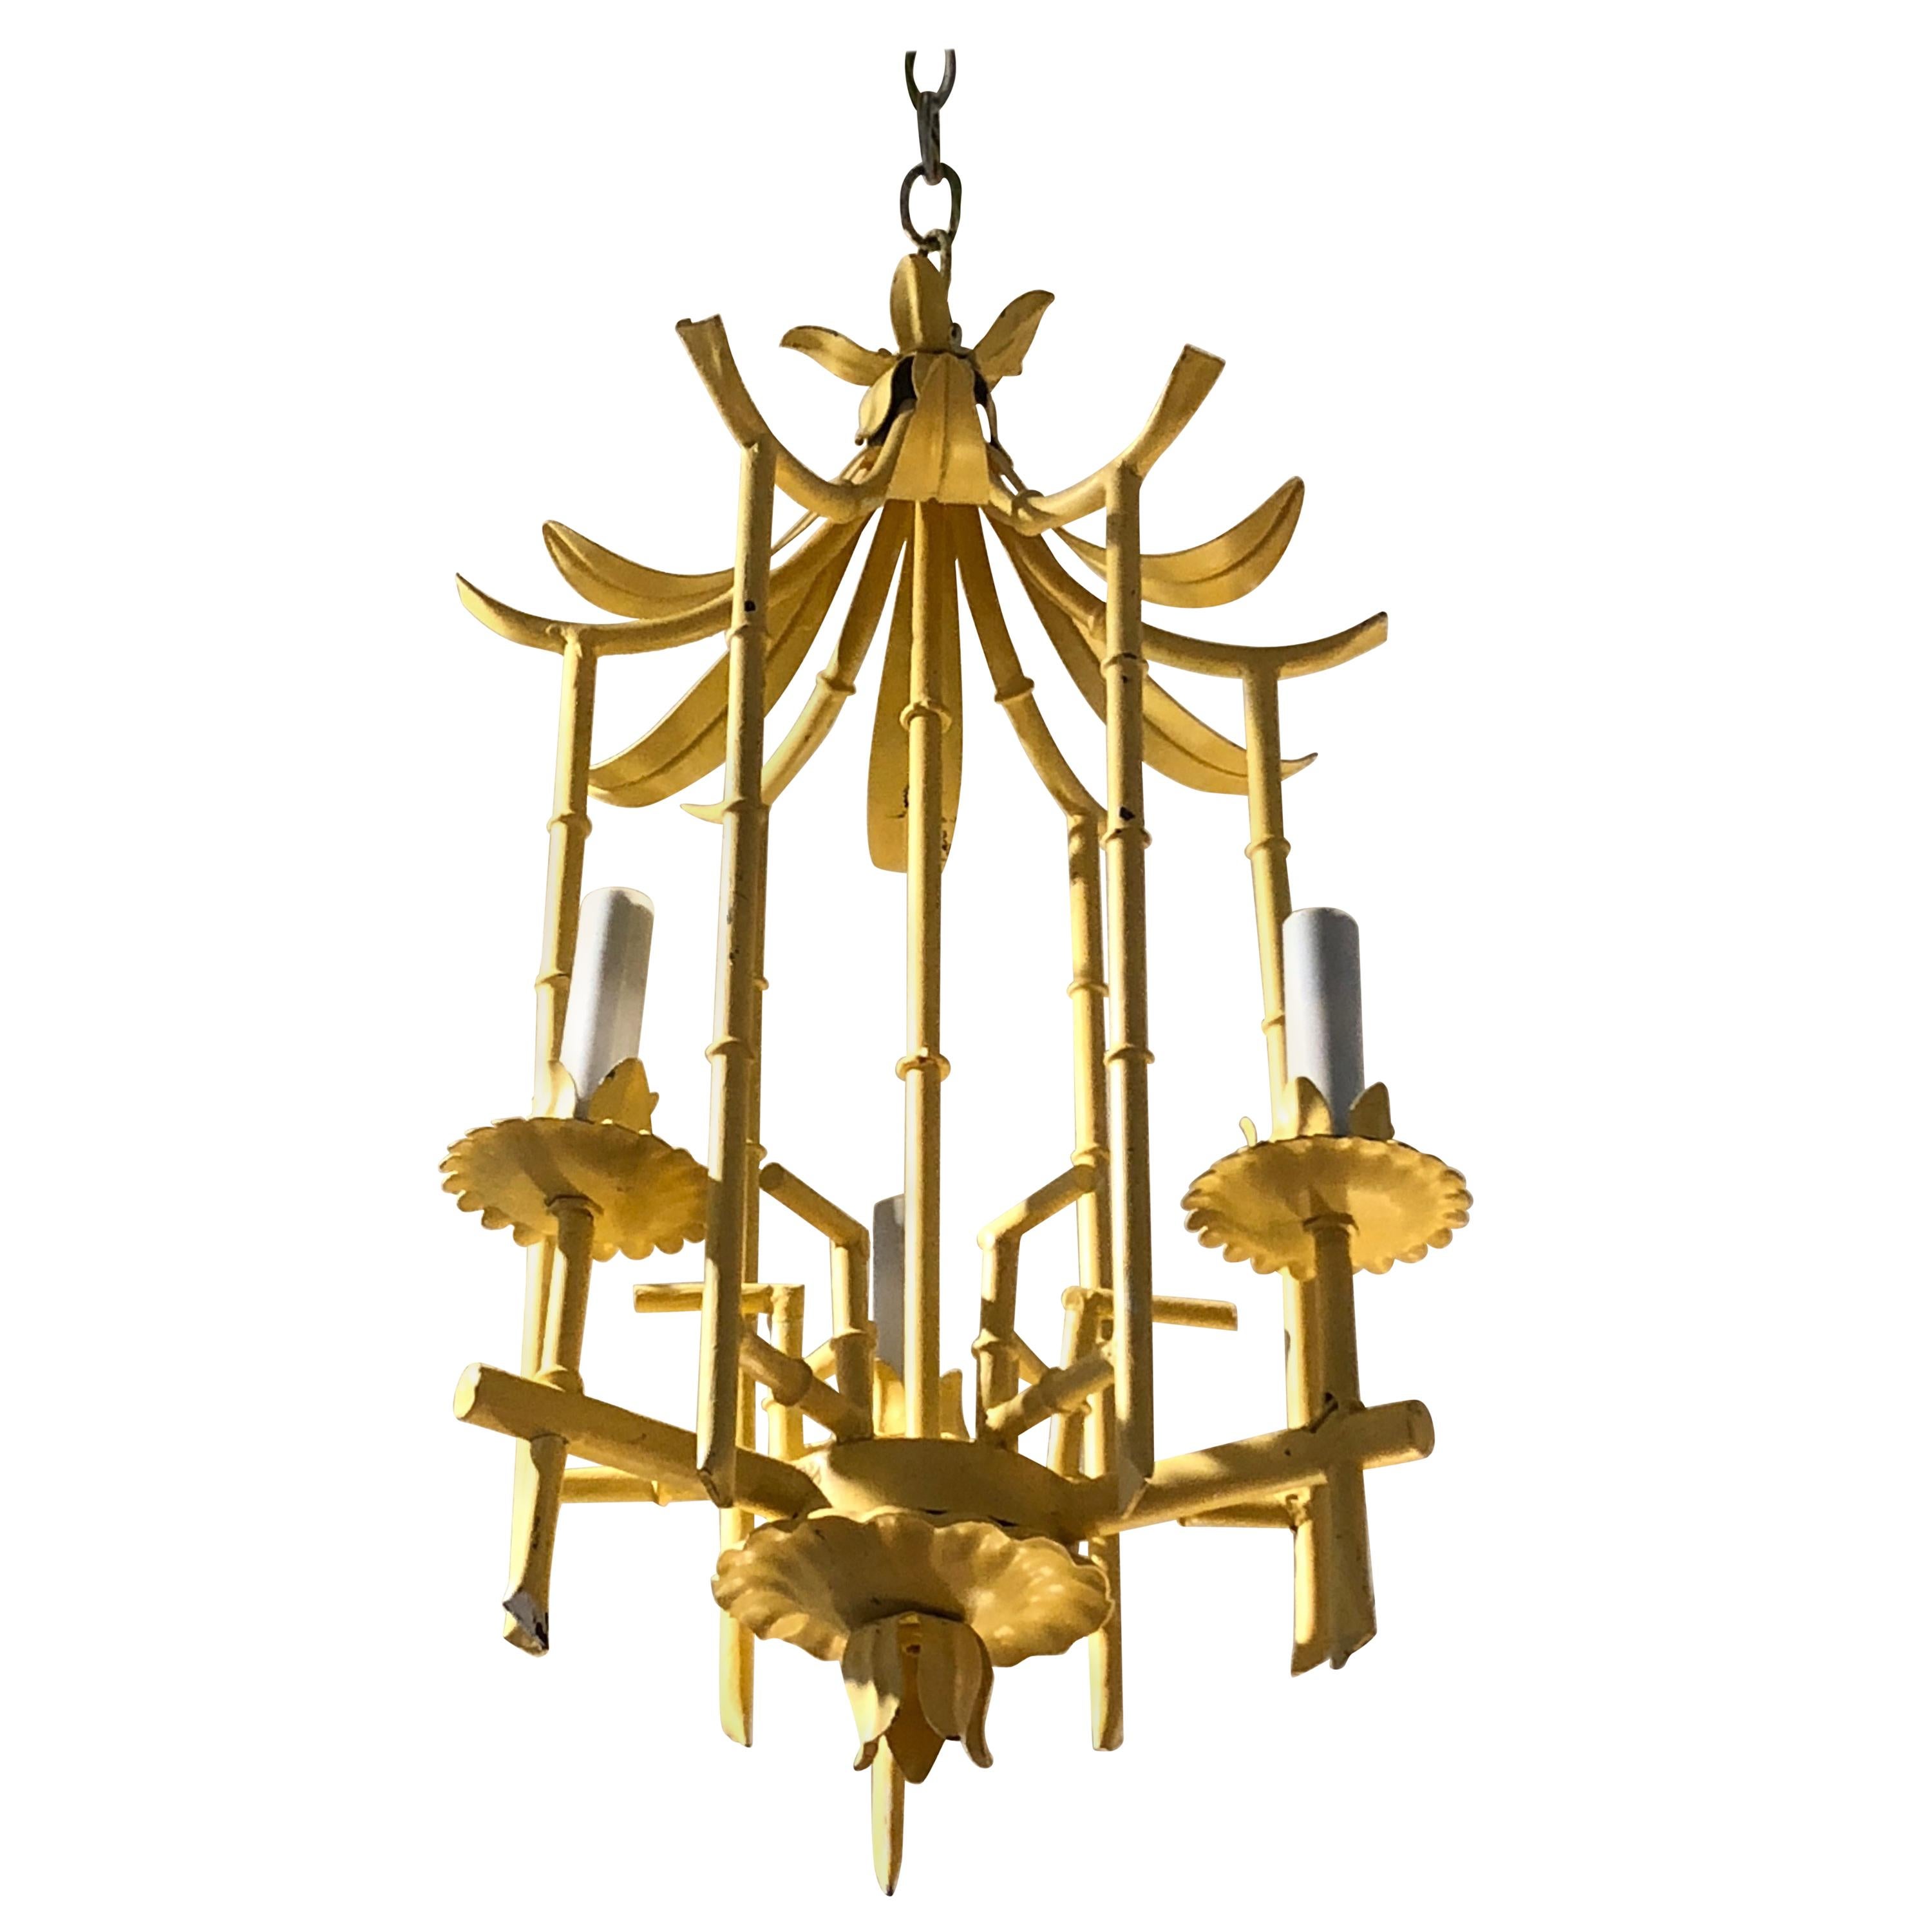 Stylish Hollywood Regency Pagoda Tole and Faux Bamboo Chandelier Pendant